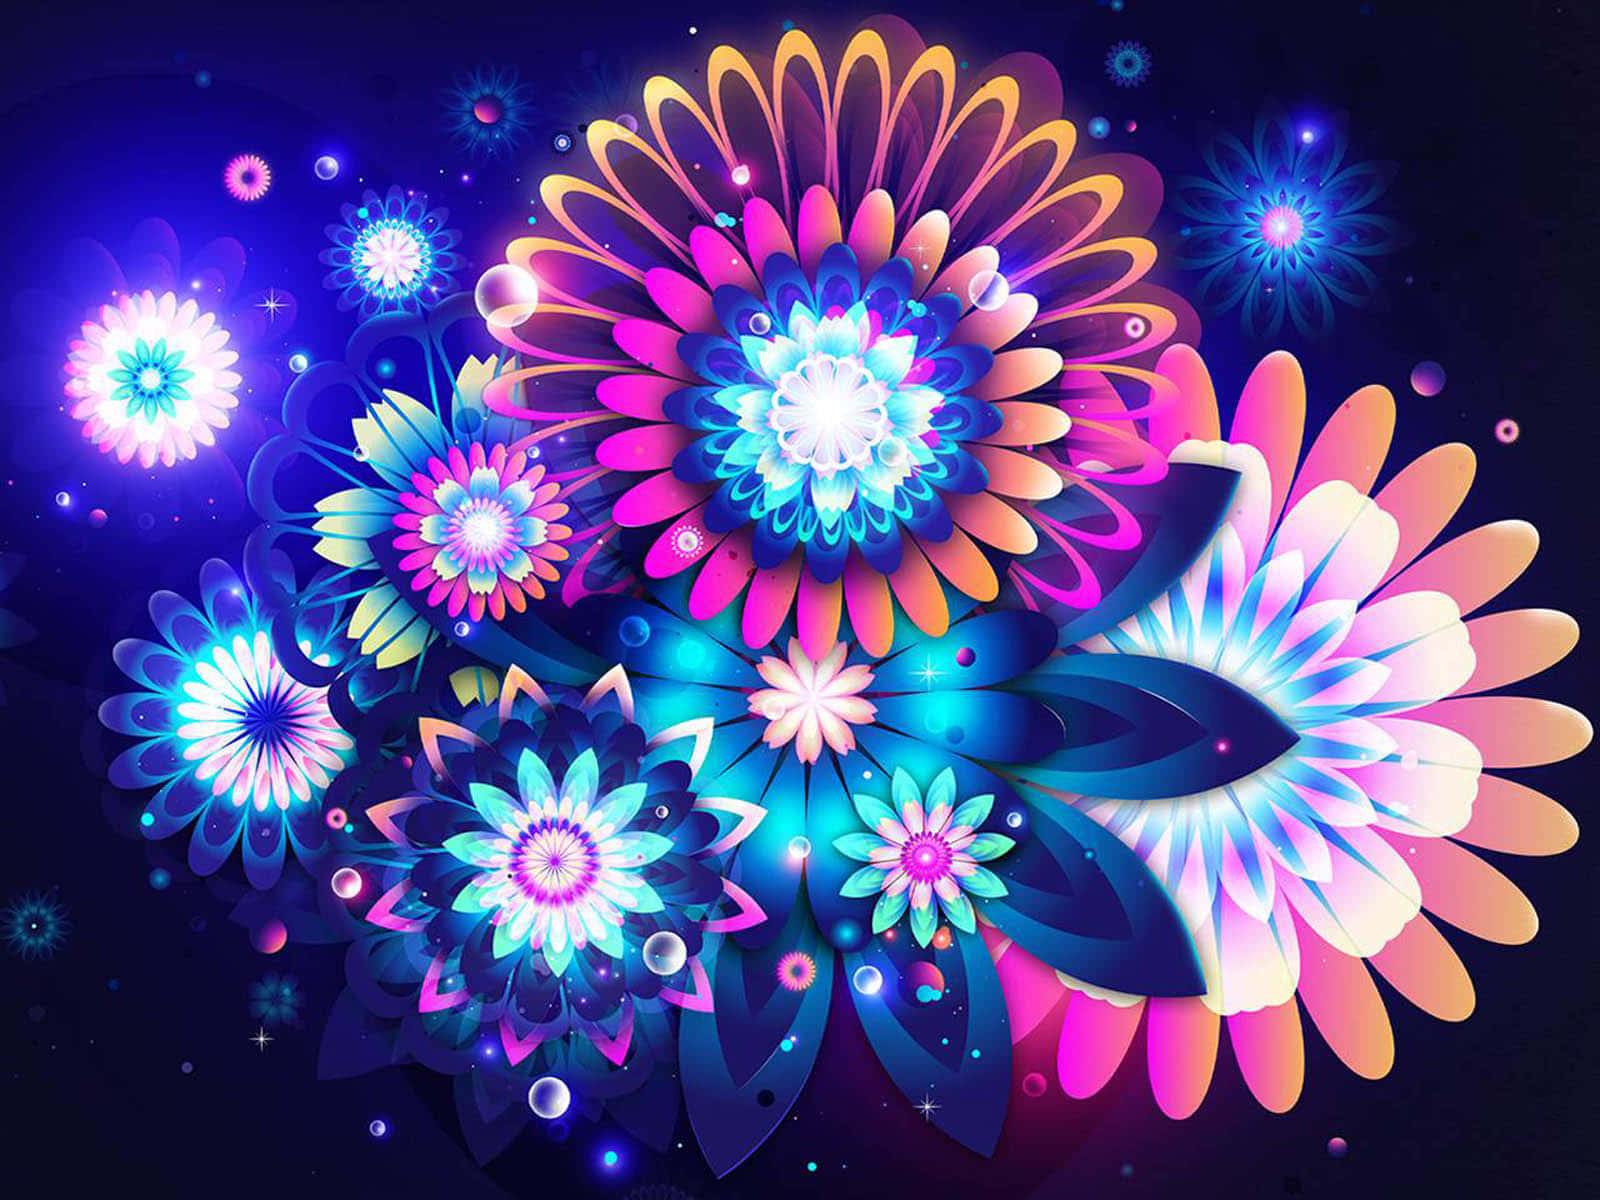 A Colorful Flower Design With Bright Lights